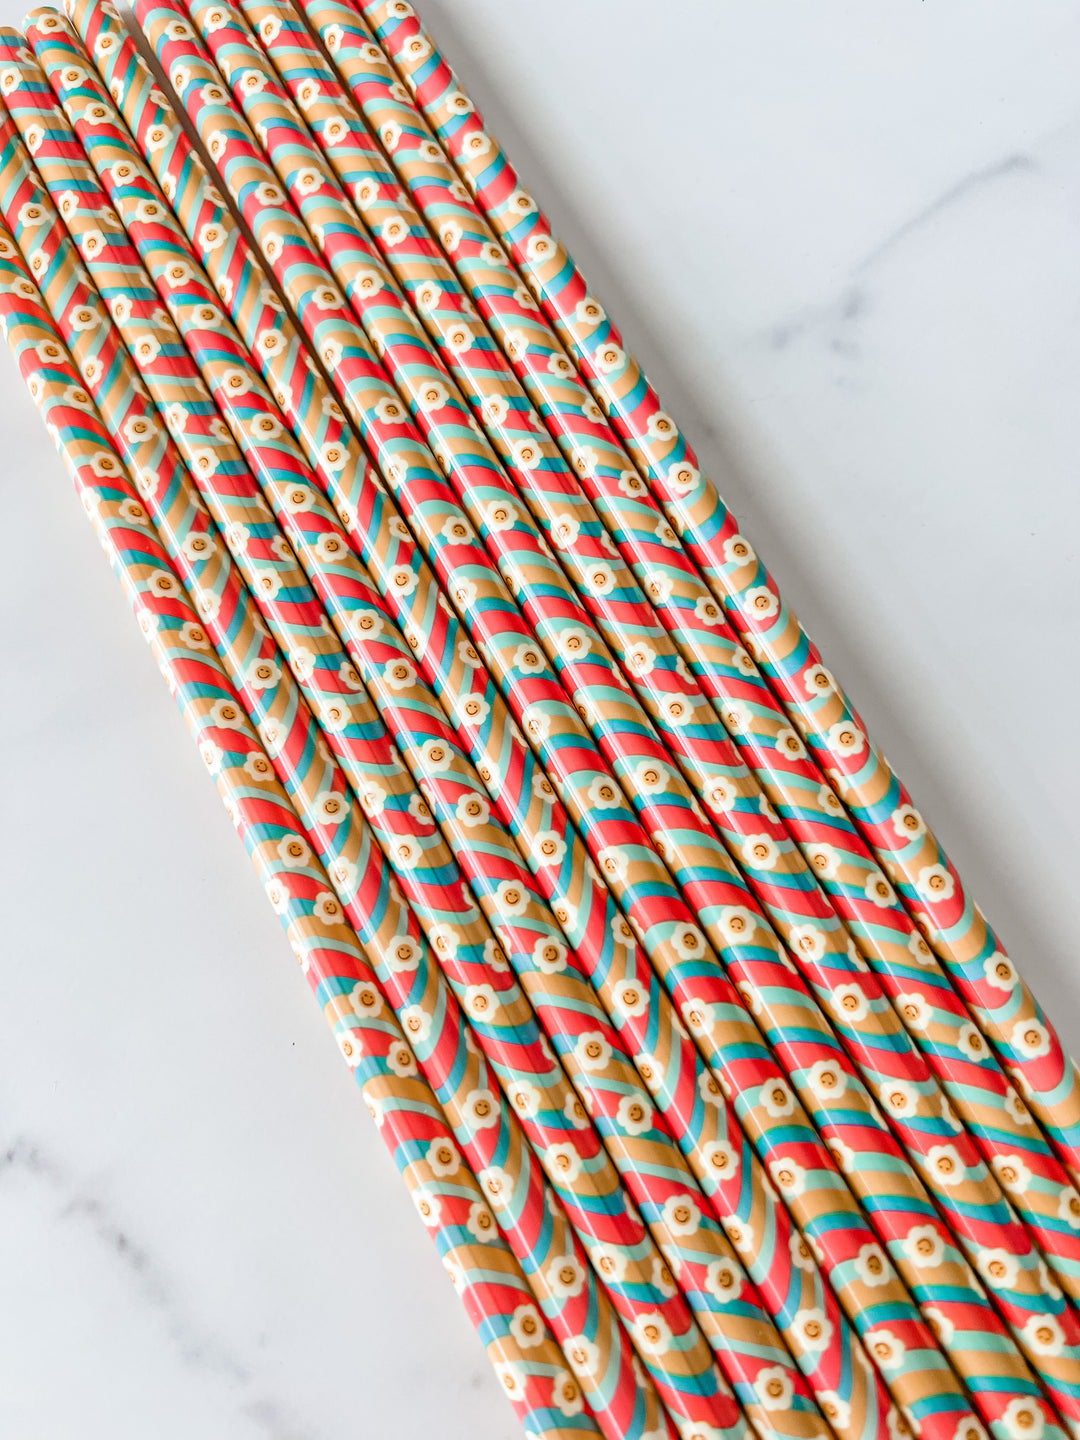 Reusable Straw Set Tall - Confetti Pink - Miller St. Boutique